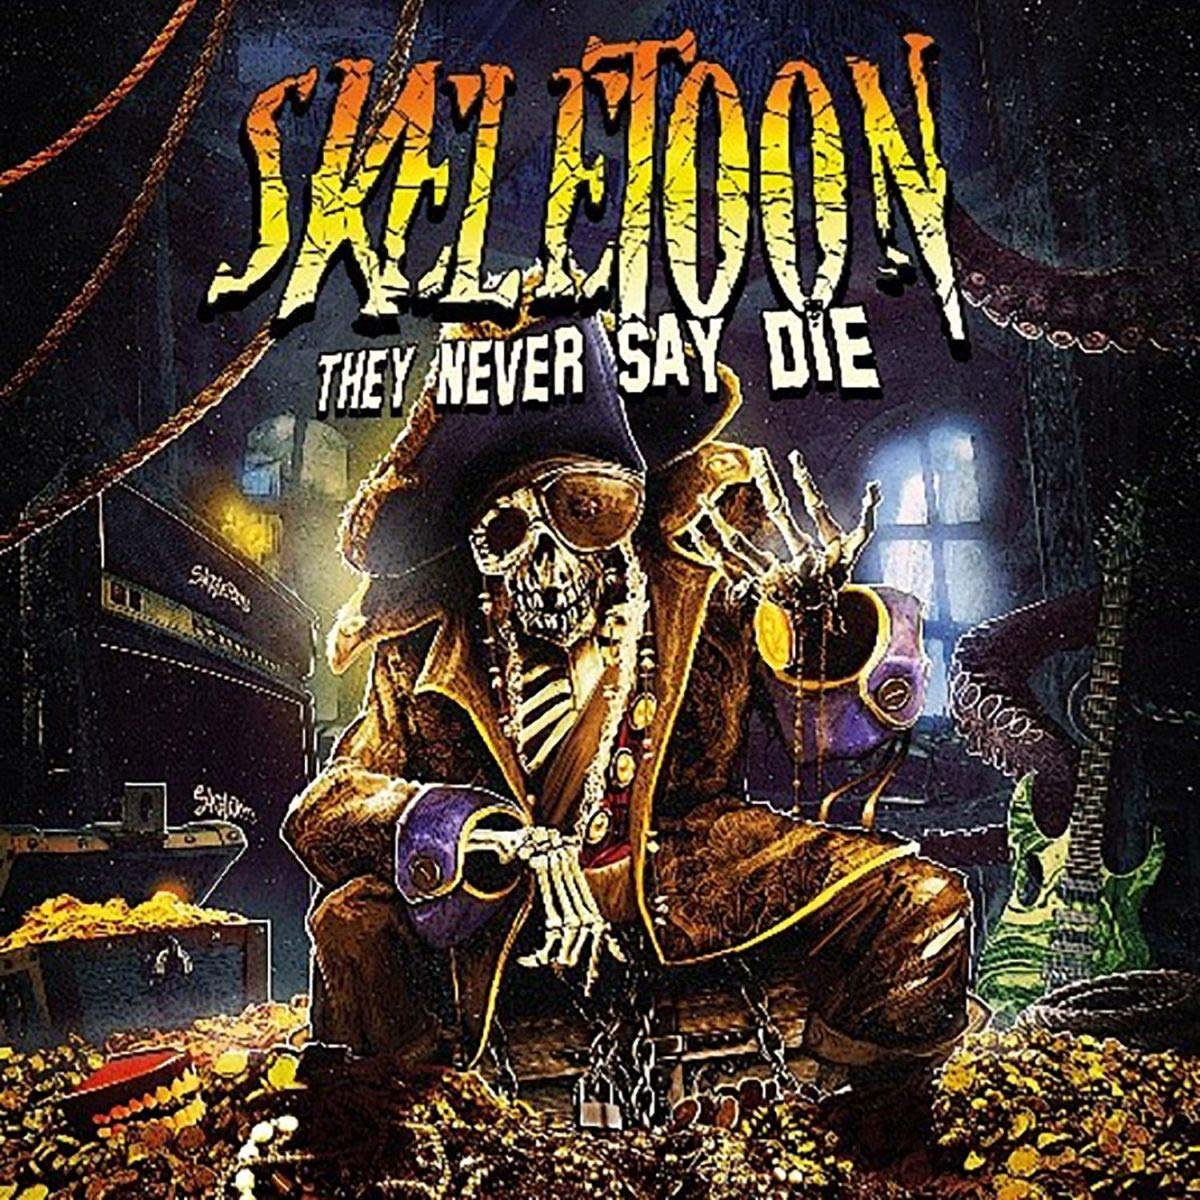 SKELETOON - They Never Say Die cover 